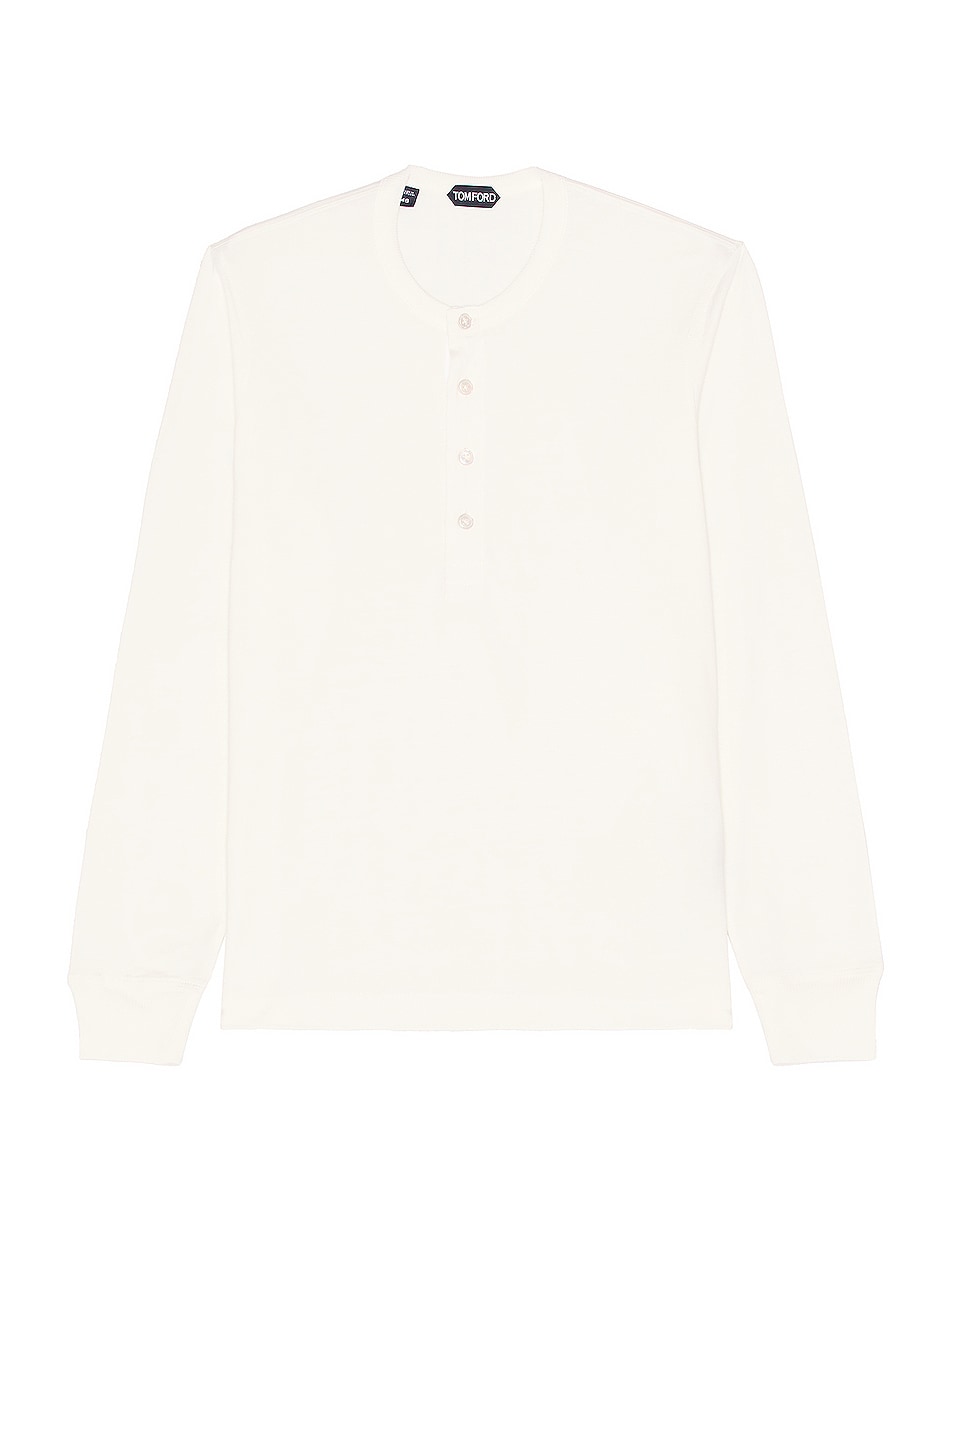 Image 1 of TOM FORD Long Sleeve Henley T-Shirt in White